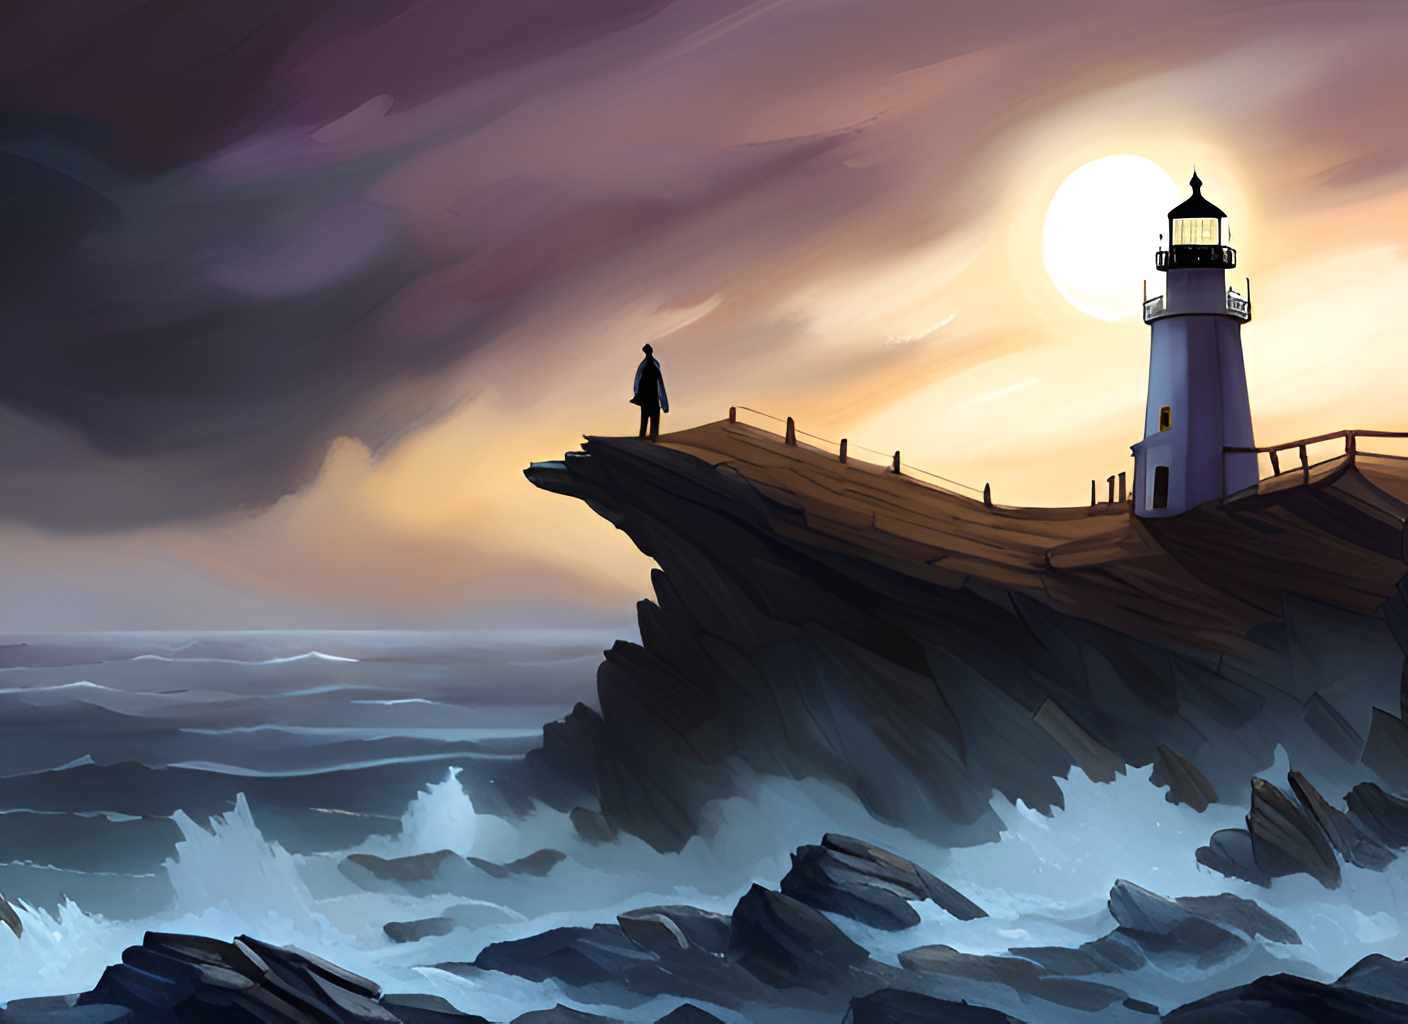 An image generated by SDXL. It's an atmospheric painting of a rocky point at the ocean, with a human figure standing atop the point. The figure appears to be looking back inland towards a lighthouse, perhaps 50-100 steps away. There are short fences (or handrails?) with fenceposts leading back to and around the lighthouse. The sky looks dark and stormy, with purples, browns, and yellows. The sun is bright behind the lighthouse, with the disc of the sun visible through the clouds, highlighting the lighthouse in a dramatic way. Small but dynamic waves are crashing on rocks below the point.